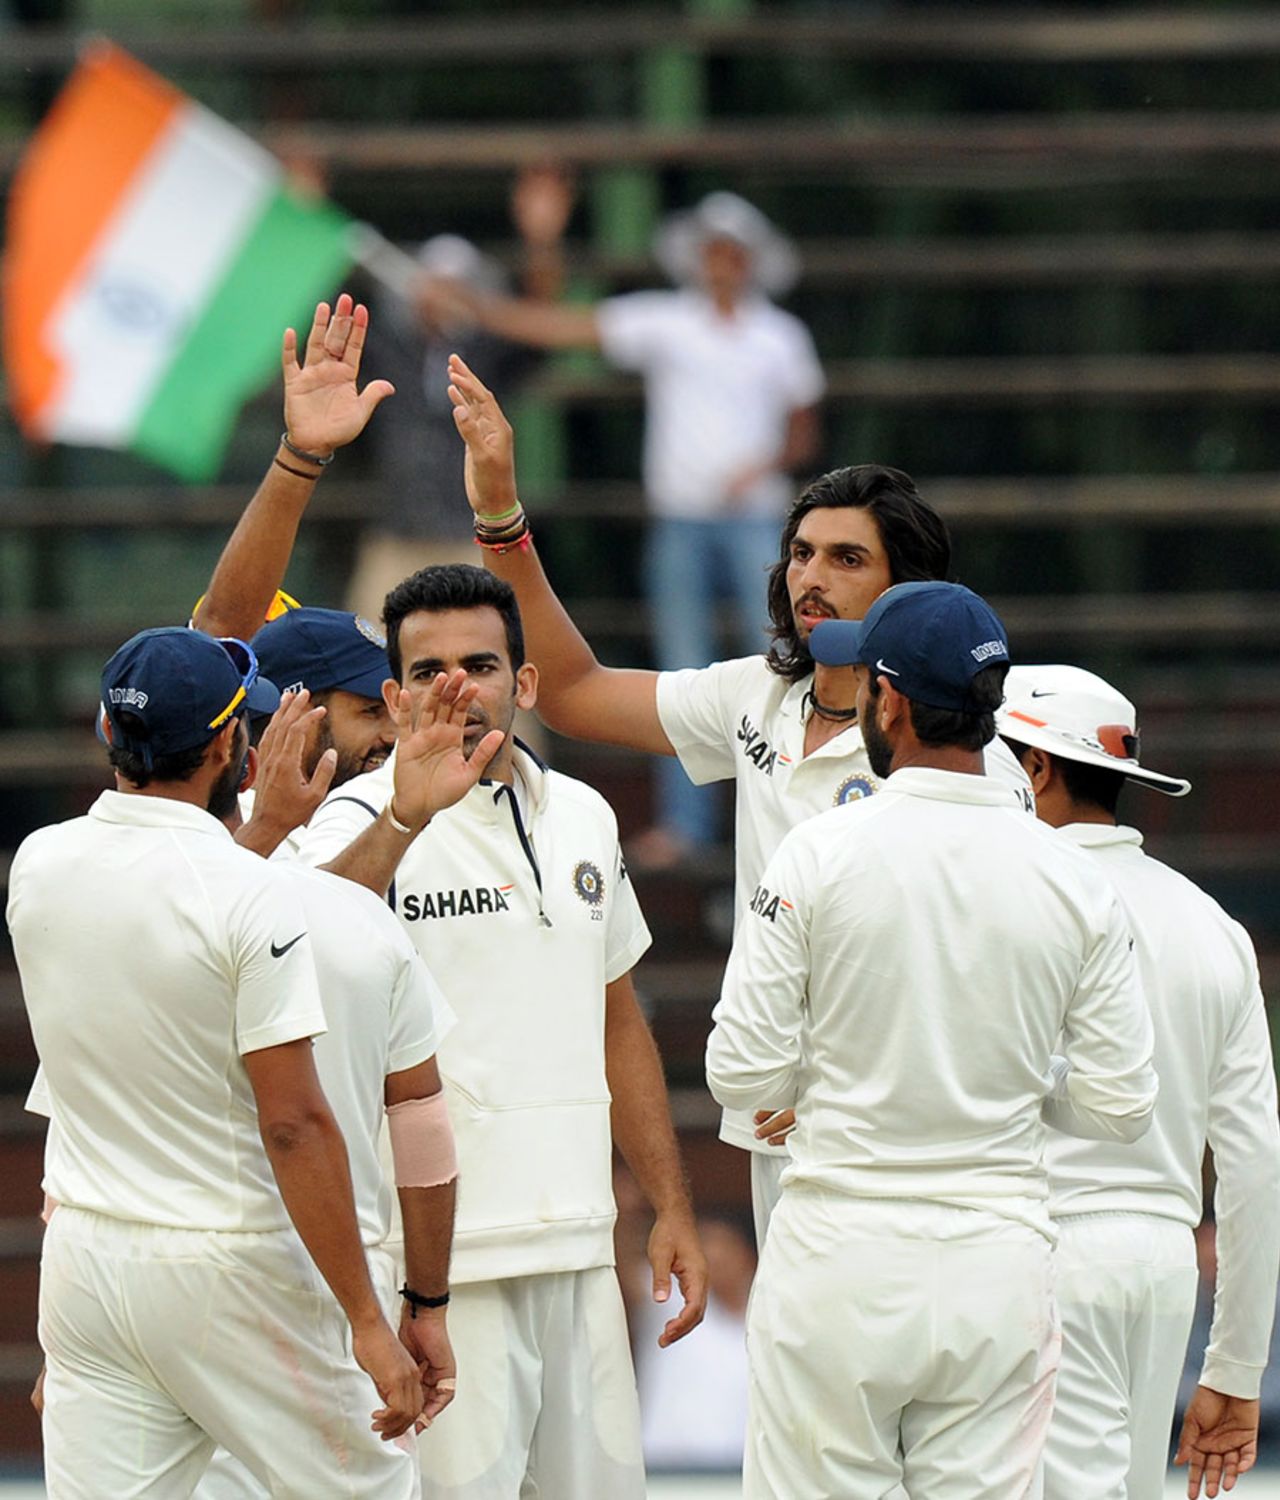 India celebrate after Ishant Sharma gets the wicket of AB de Villiers, South Africa v India, 1st Test, Johannesburg, 5th day, December 22, 2013